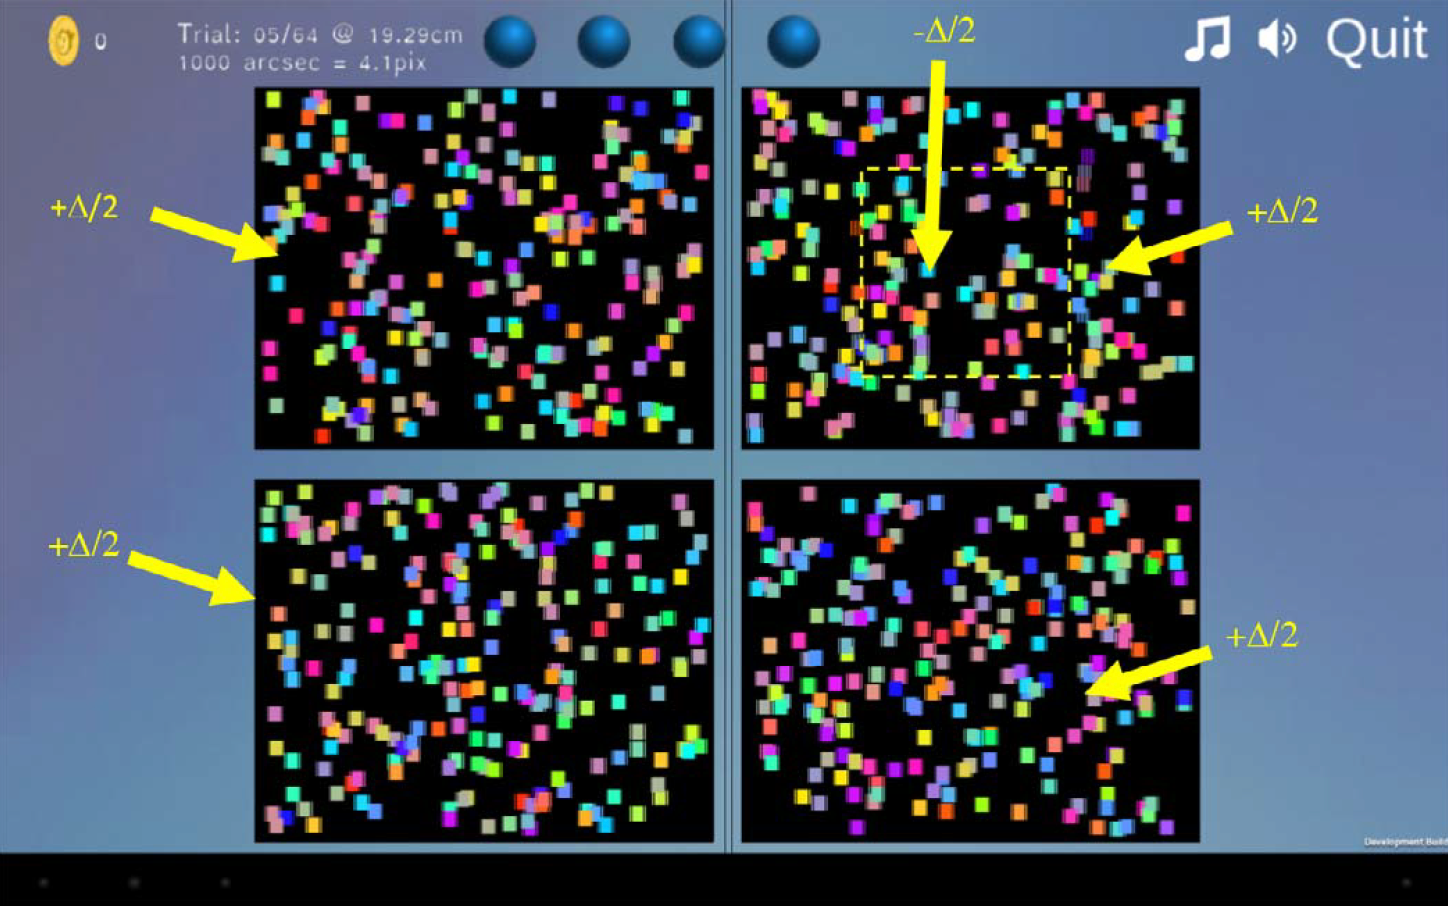 Screenshot showing the tablet-based Asteroid test stimulus, with four patches of random-dot patterns. The top right patch contains a target region perceived by the patient to be in front of the screen.